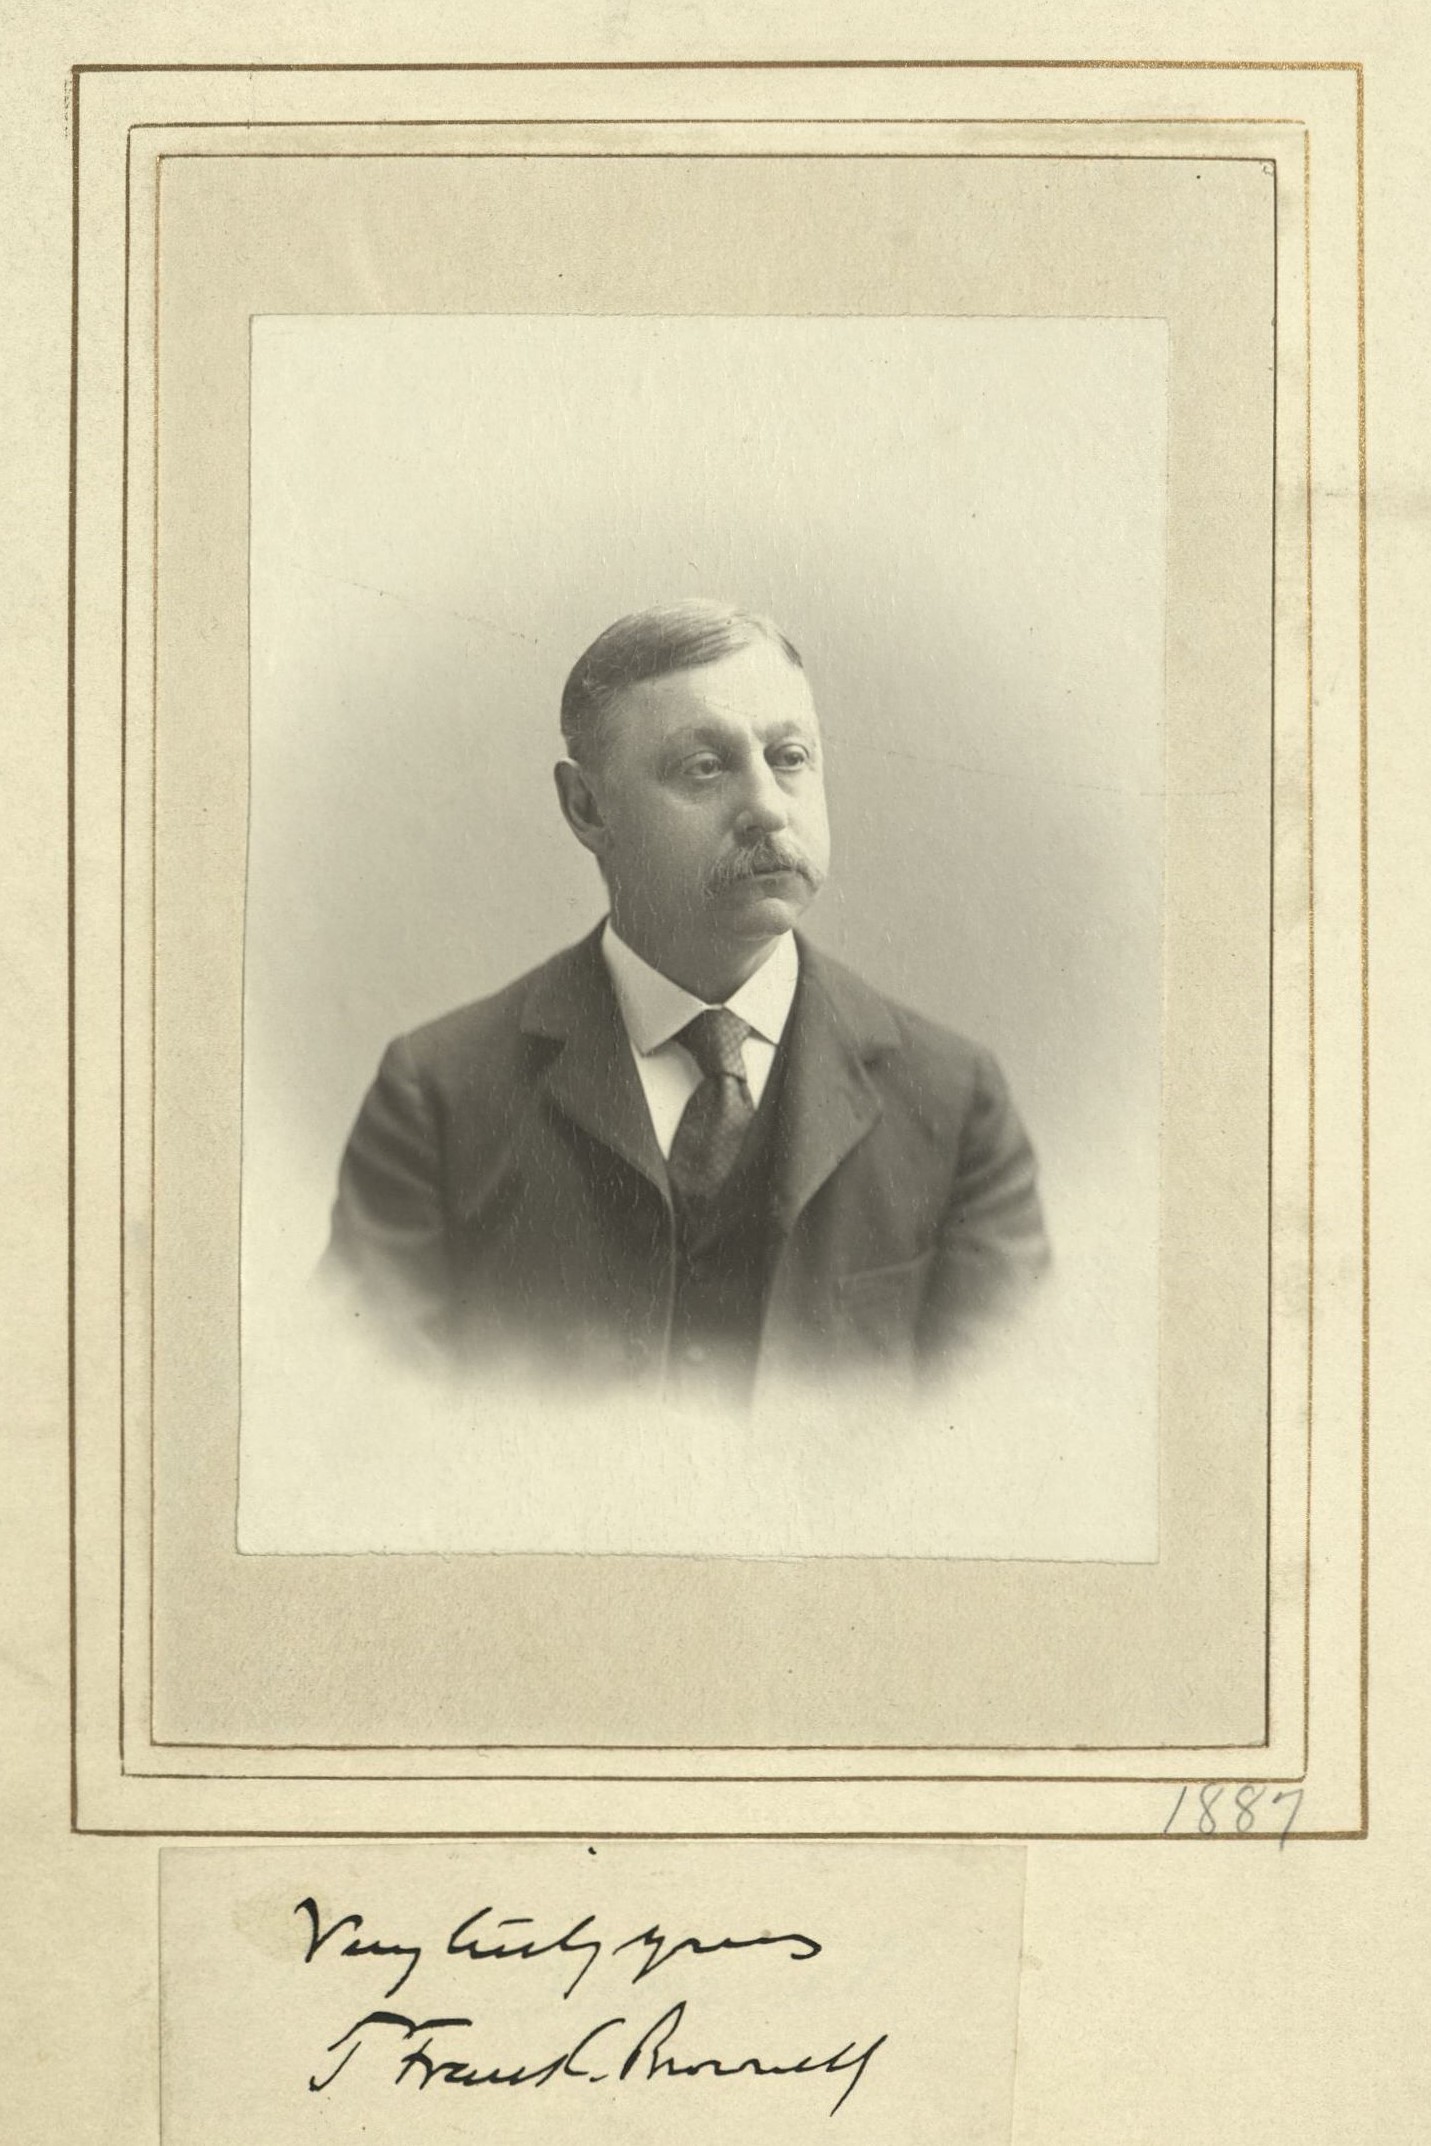 Member portrait of T. Frank Brownell